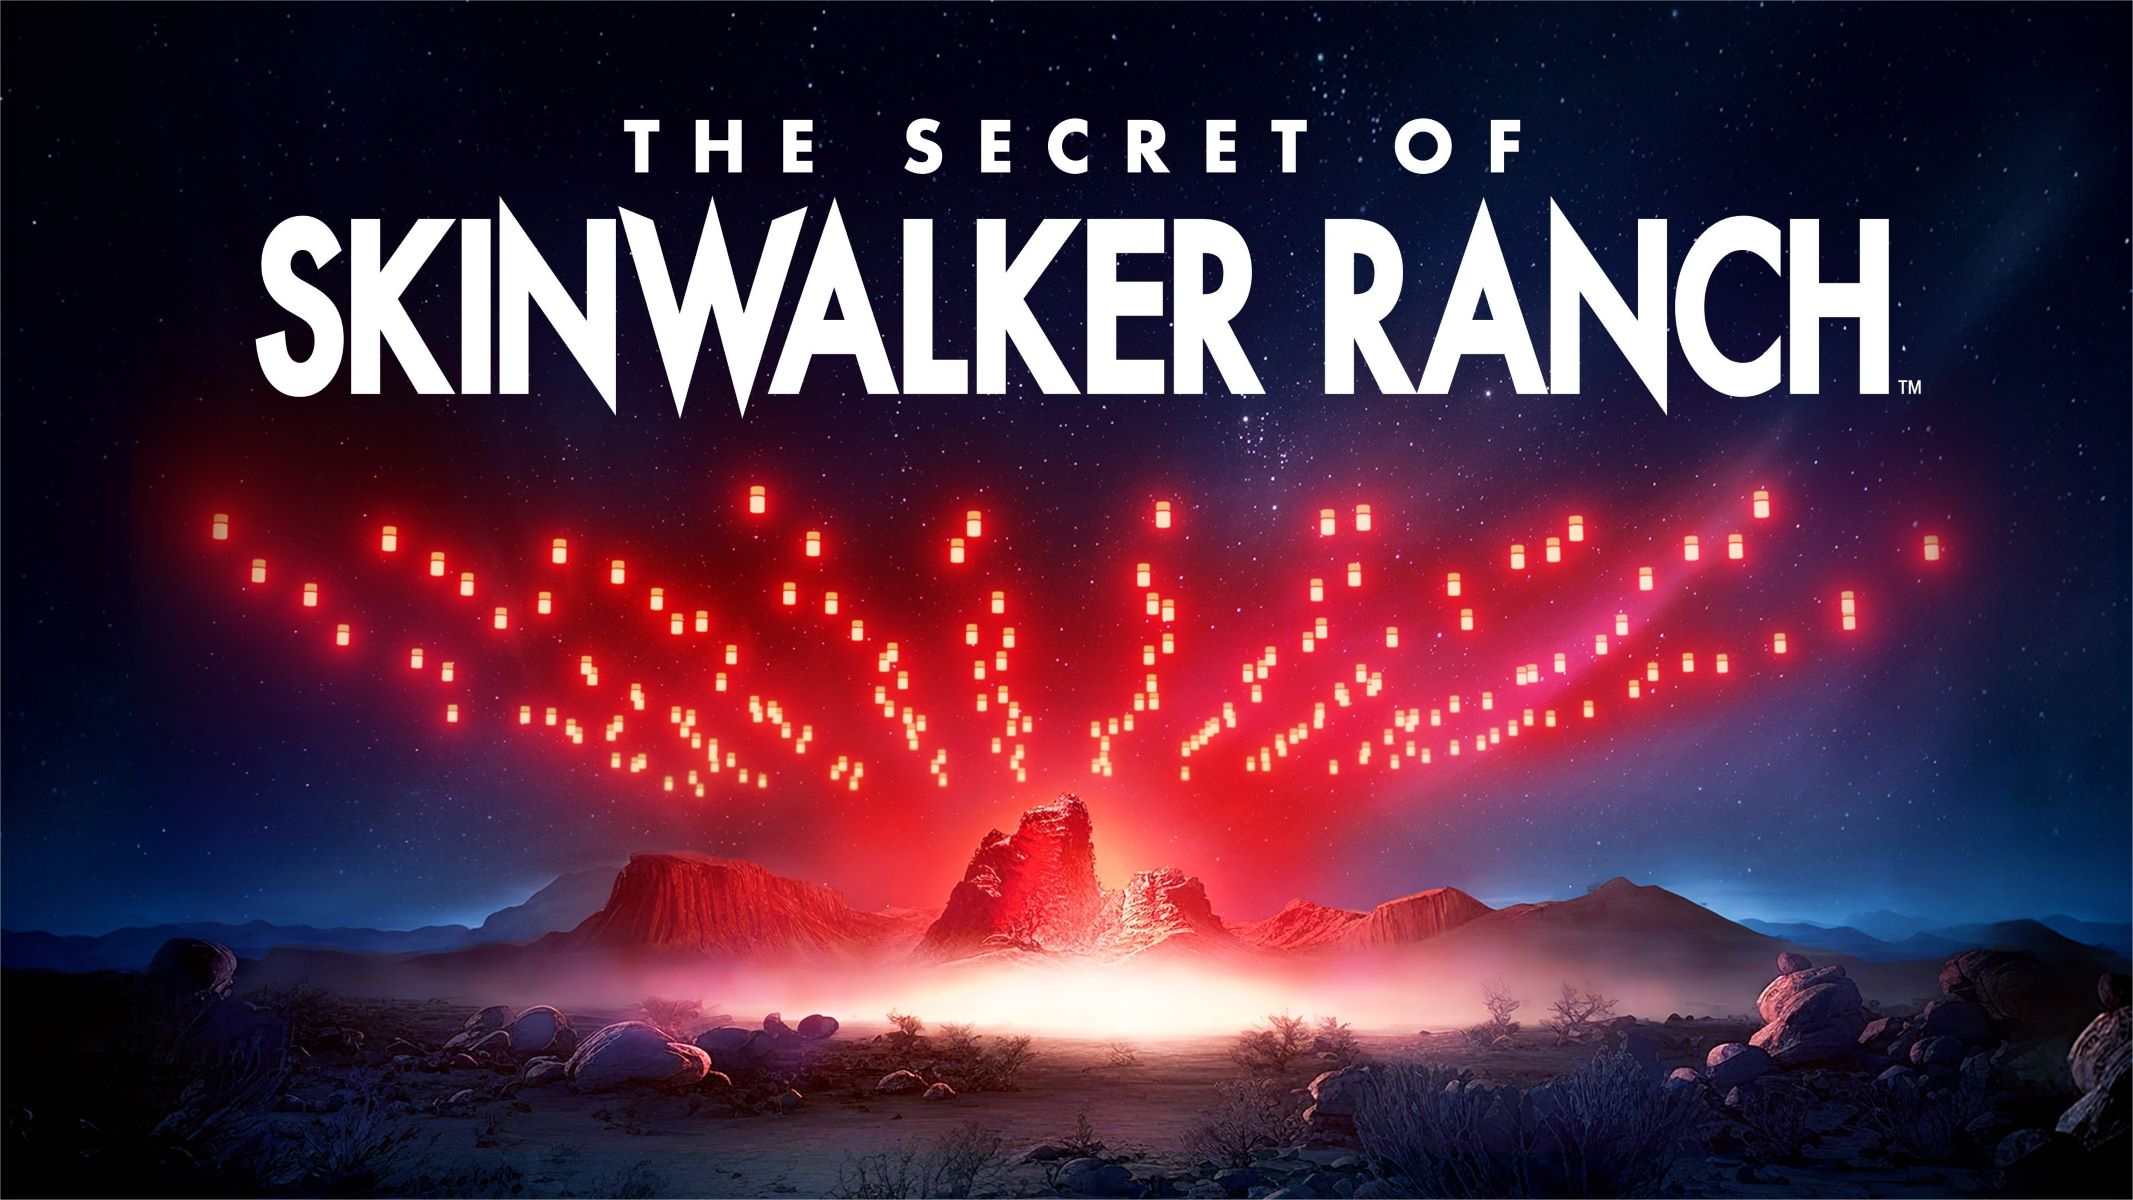 The Shocking Truth Behind The Secret Of Skinwalker Ranch Show